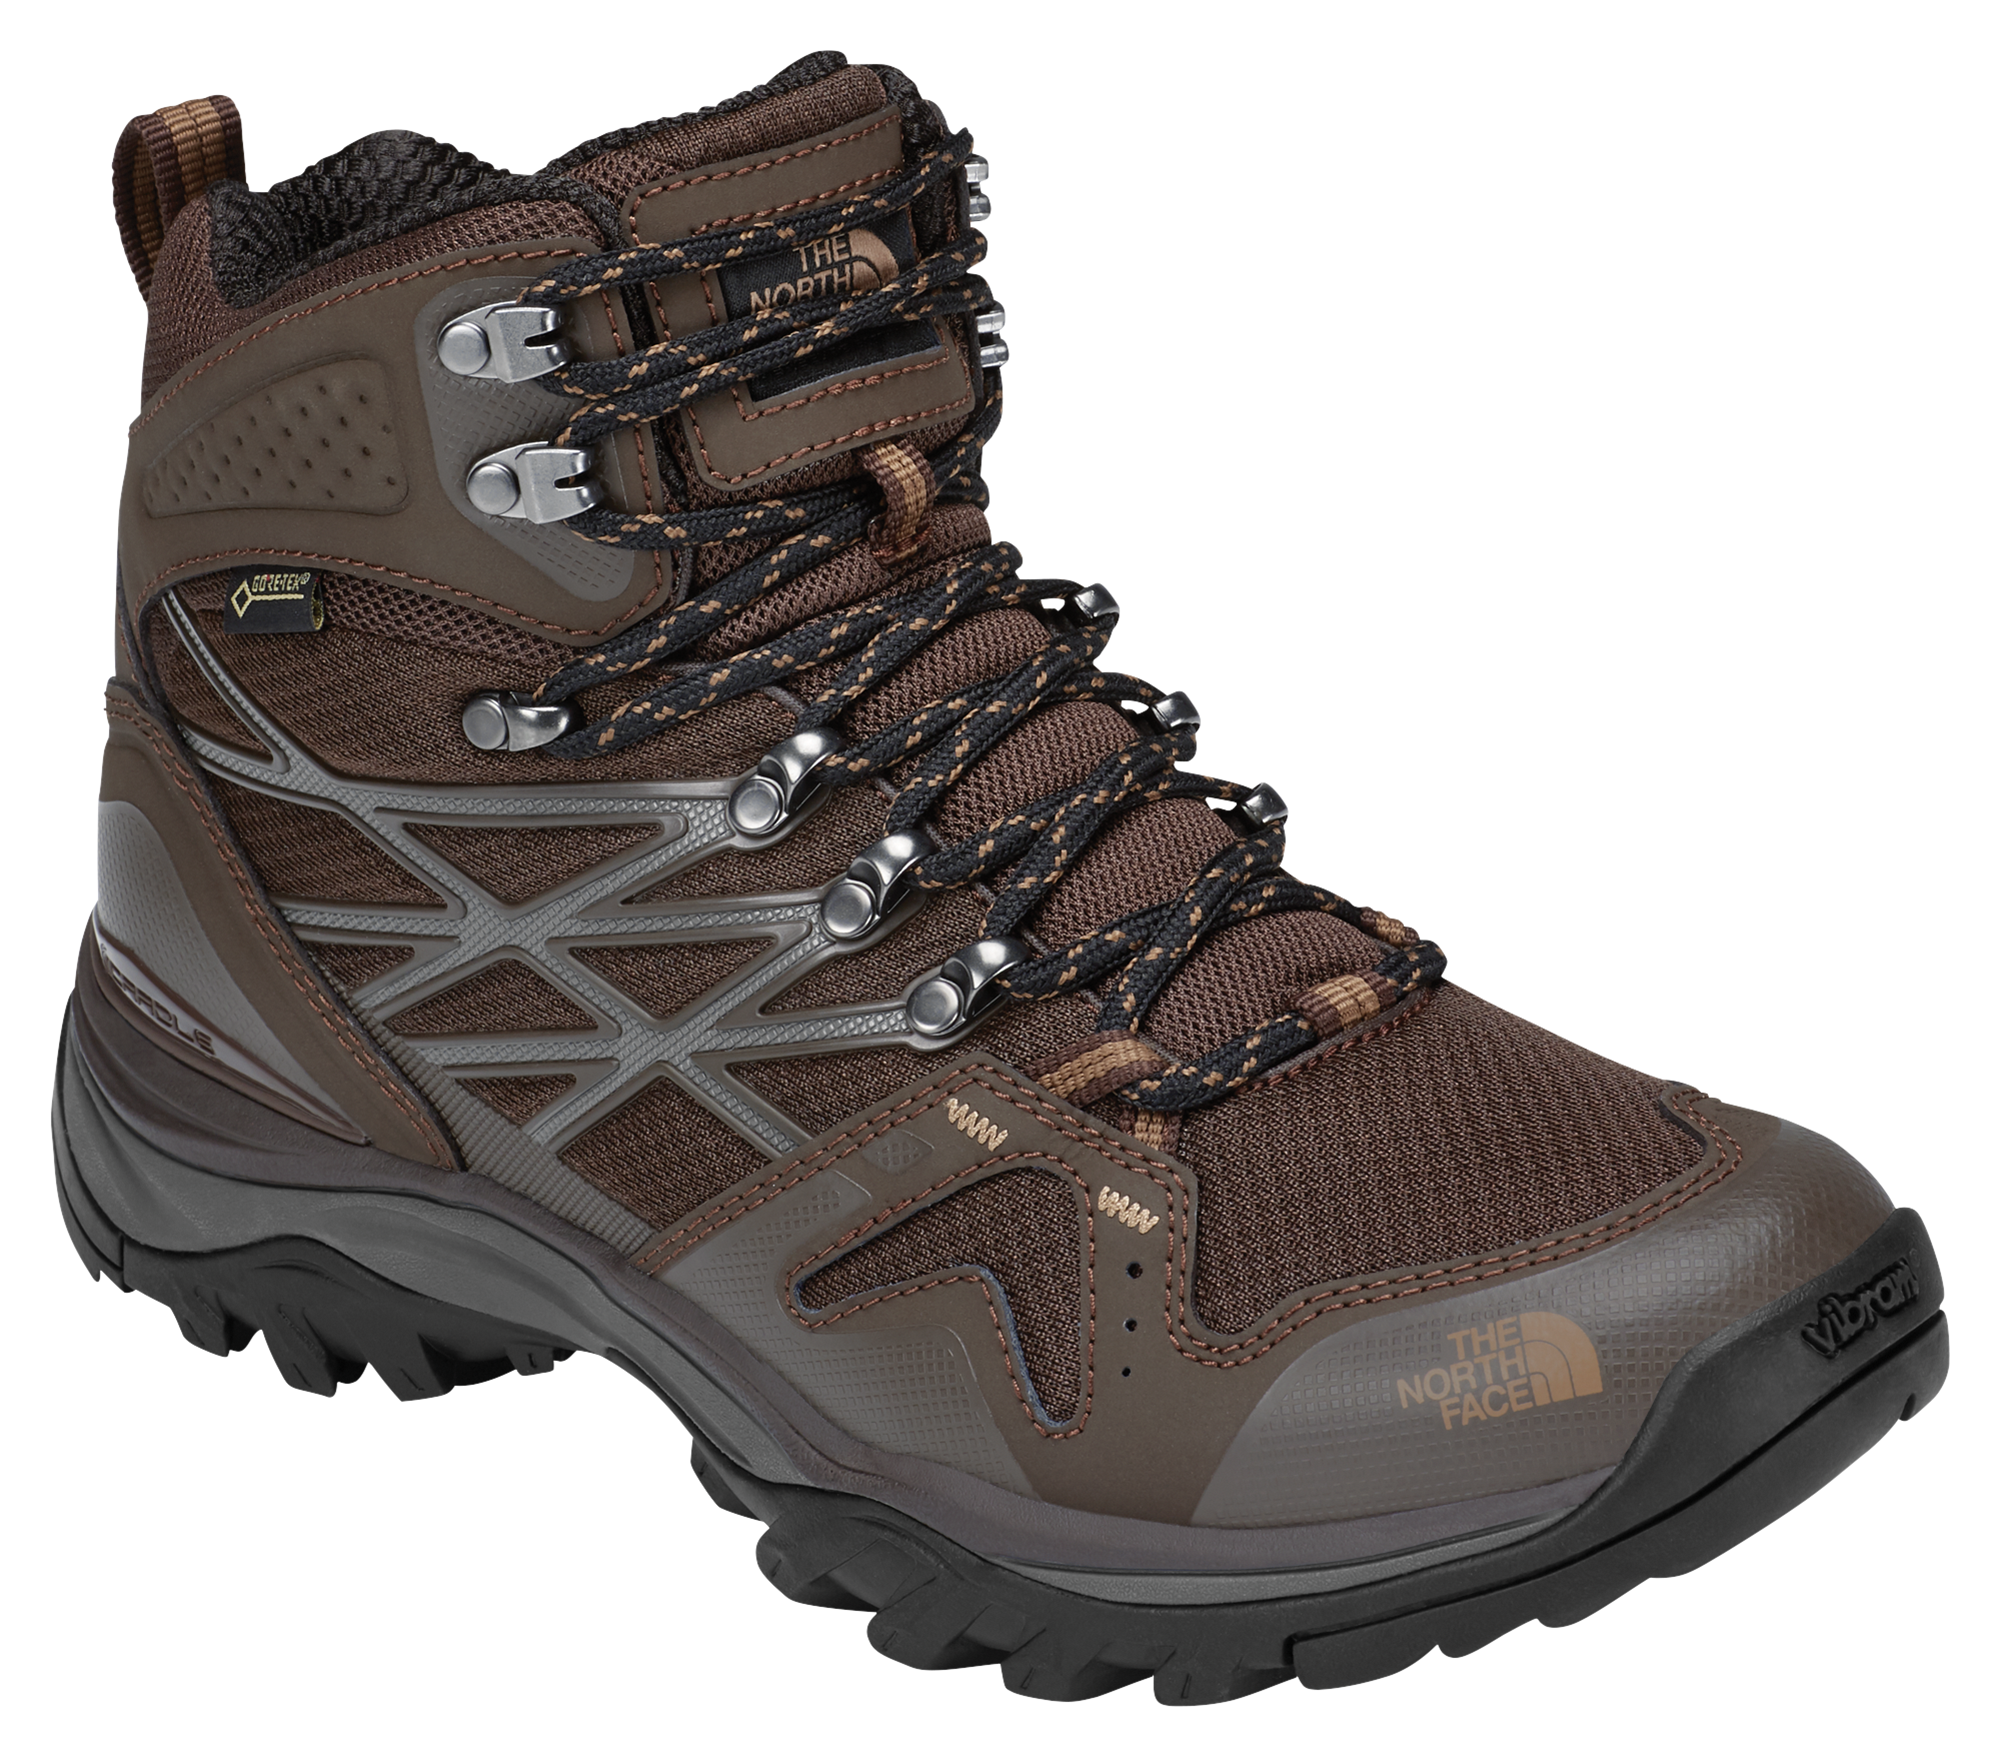 The North Face Hedgehog Fastpack Mid GTX GORE-TEX Hiking Boots for Men - Chocolate Brown/ Cargo Khaki - 13M